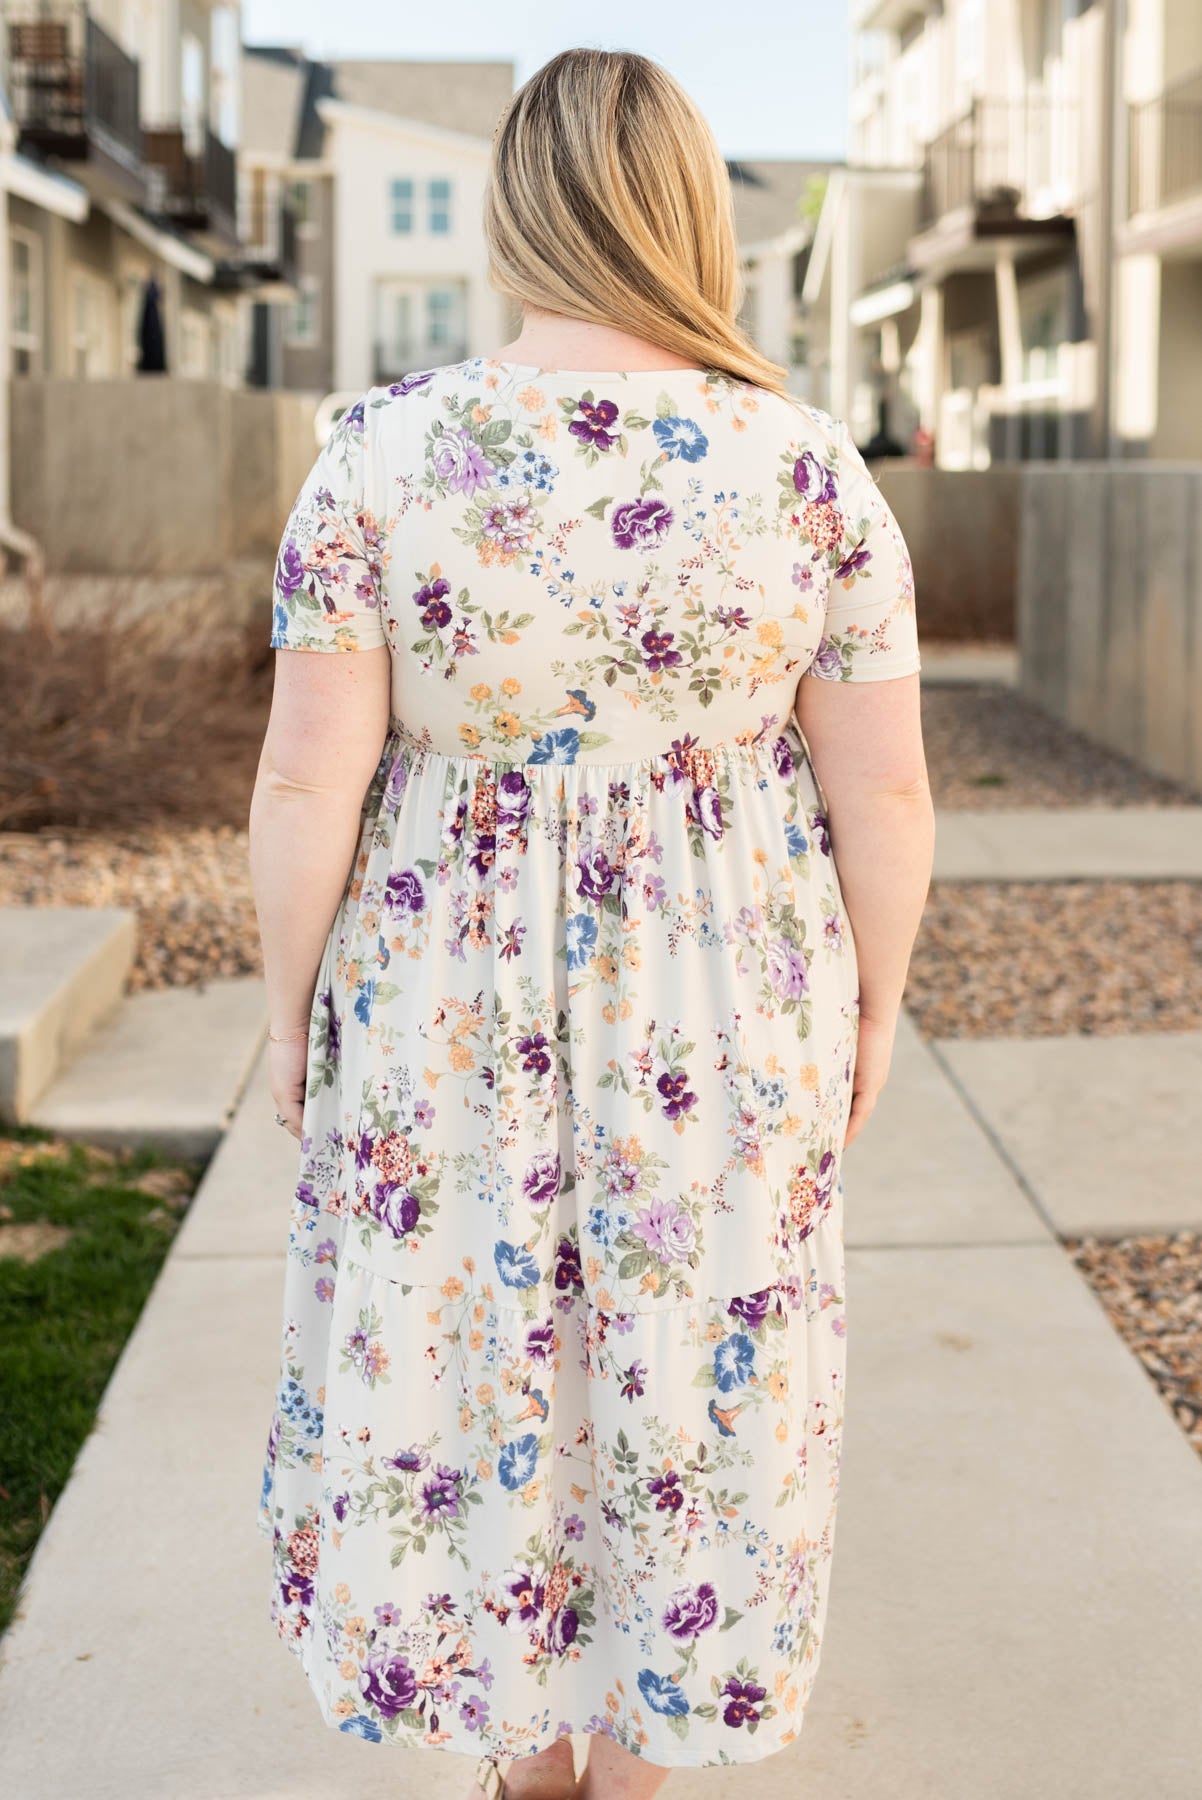 Back view of the plus size grey floral dress